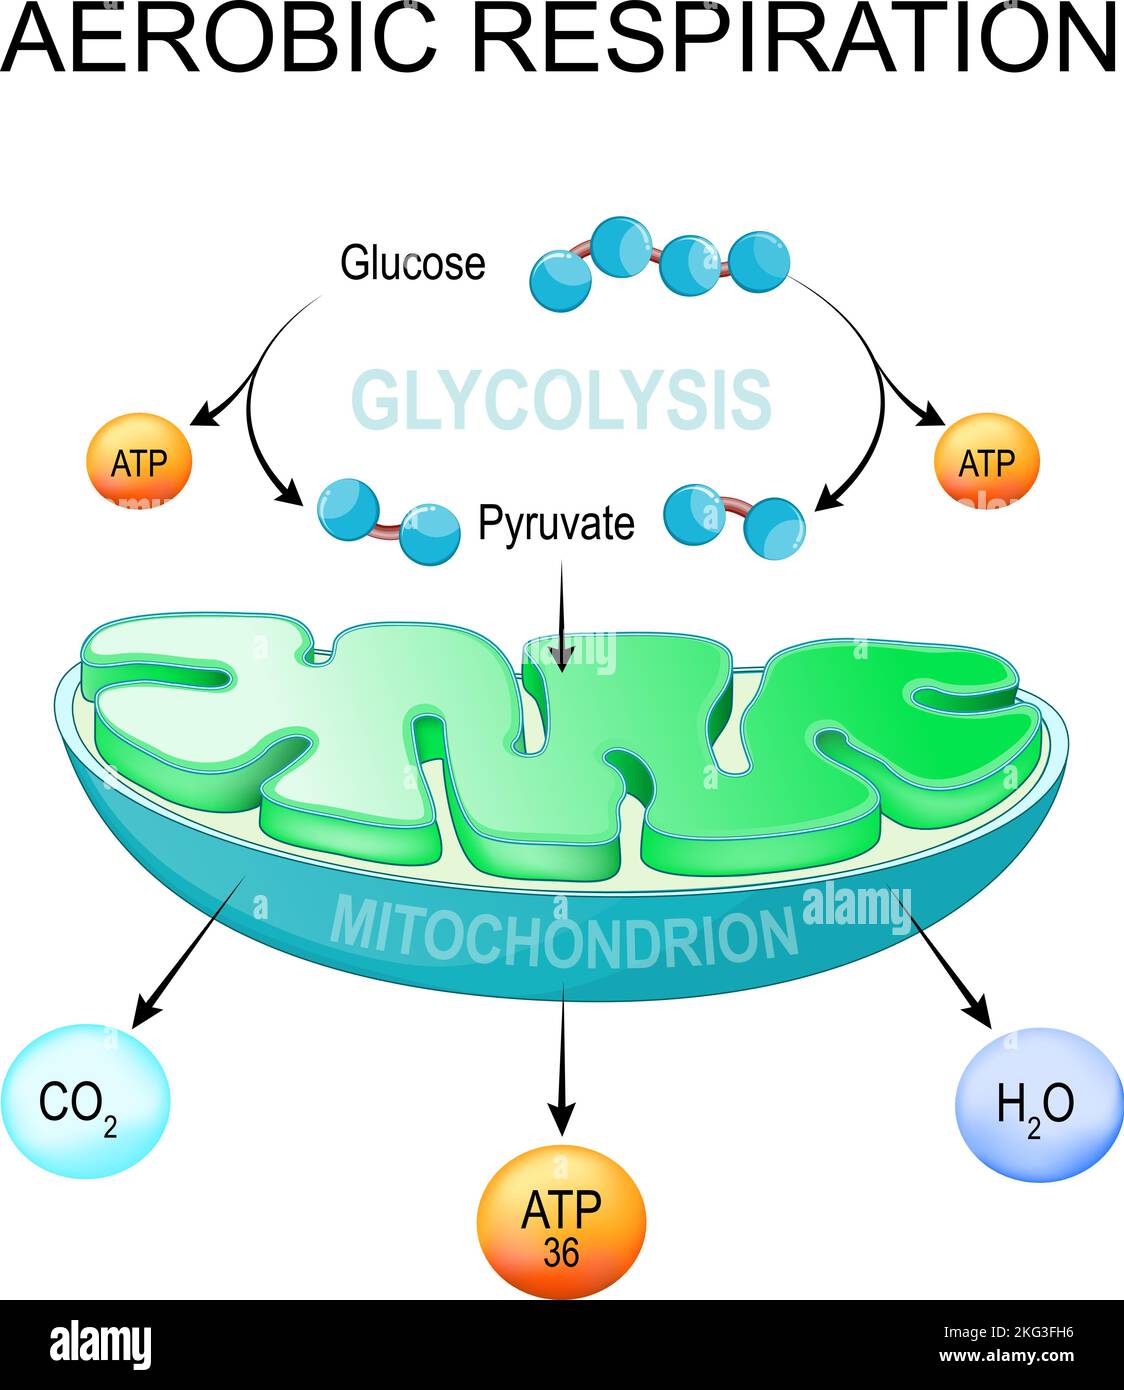 aerobic respiration. Glycolysis and ATP Synthesis in mitochondria. converting glucose into pyruvate in cells. metabolic pathway. Vector poster Stock Vector